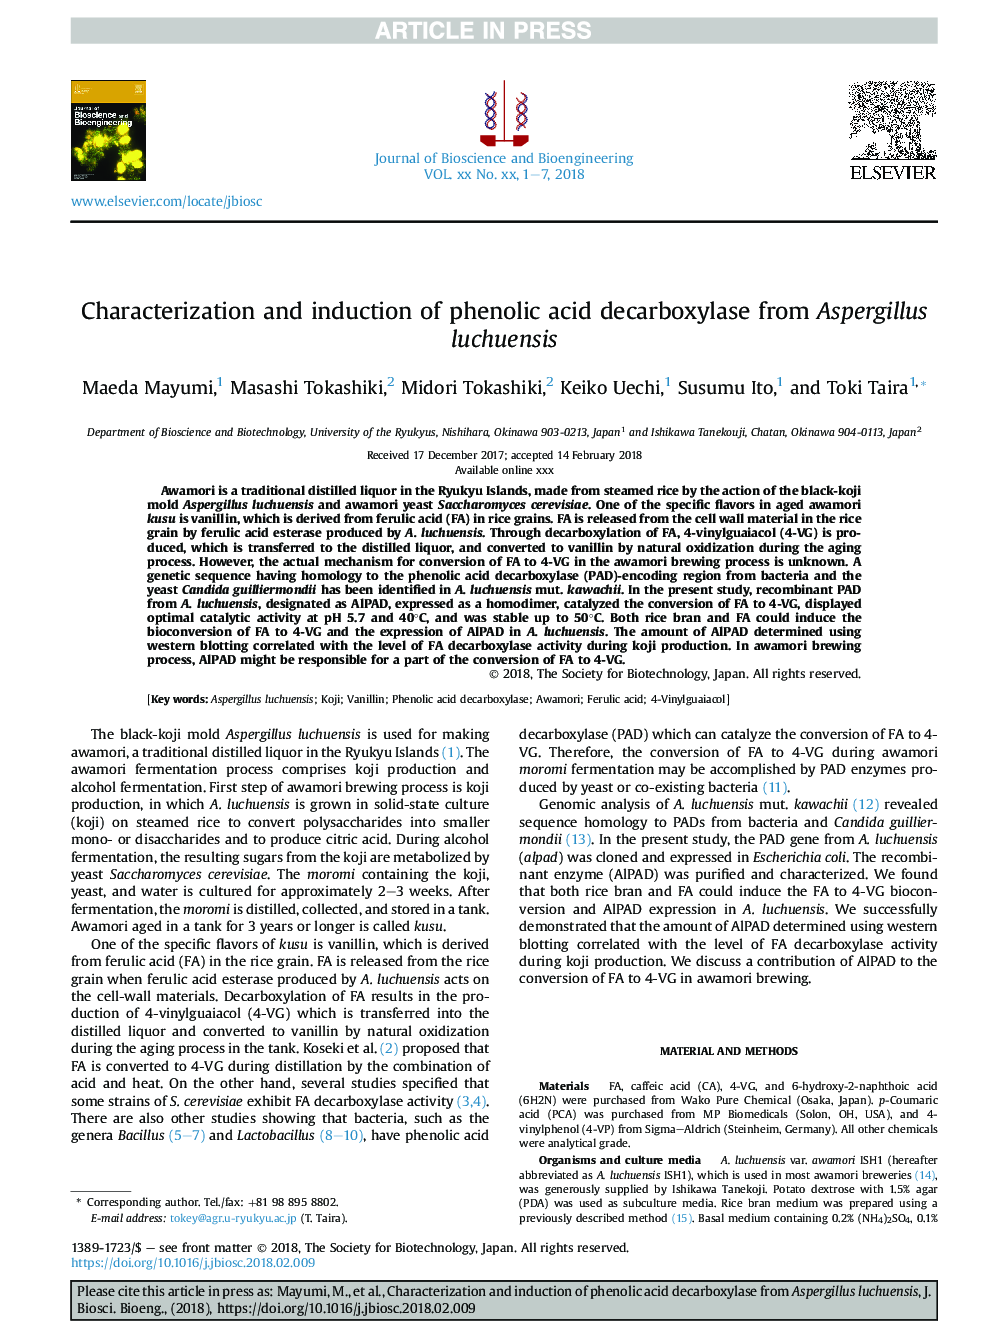 Characterization and induction of phenolic acid decarboxylase from Aspergillus luchuensis